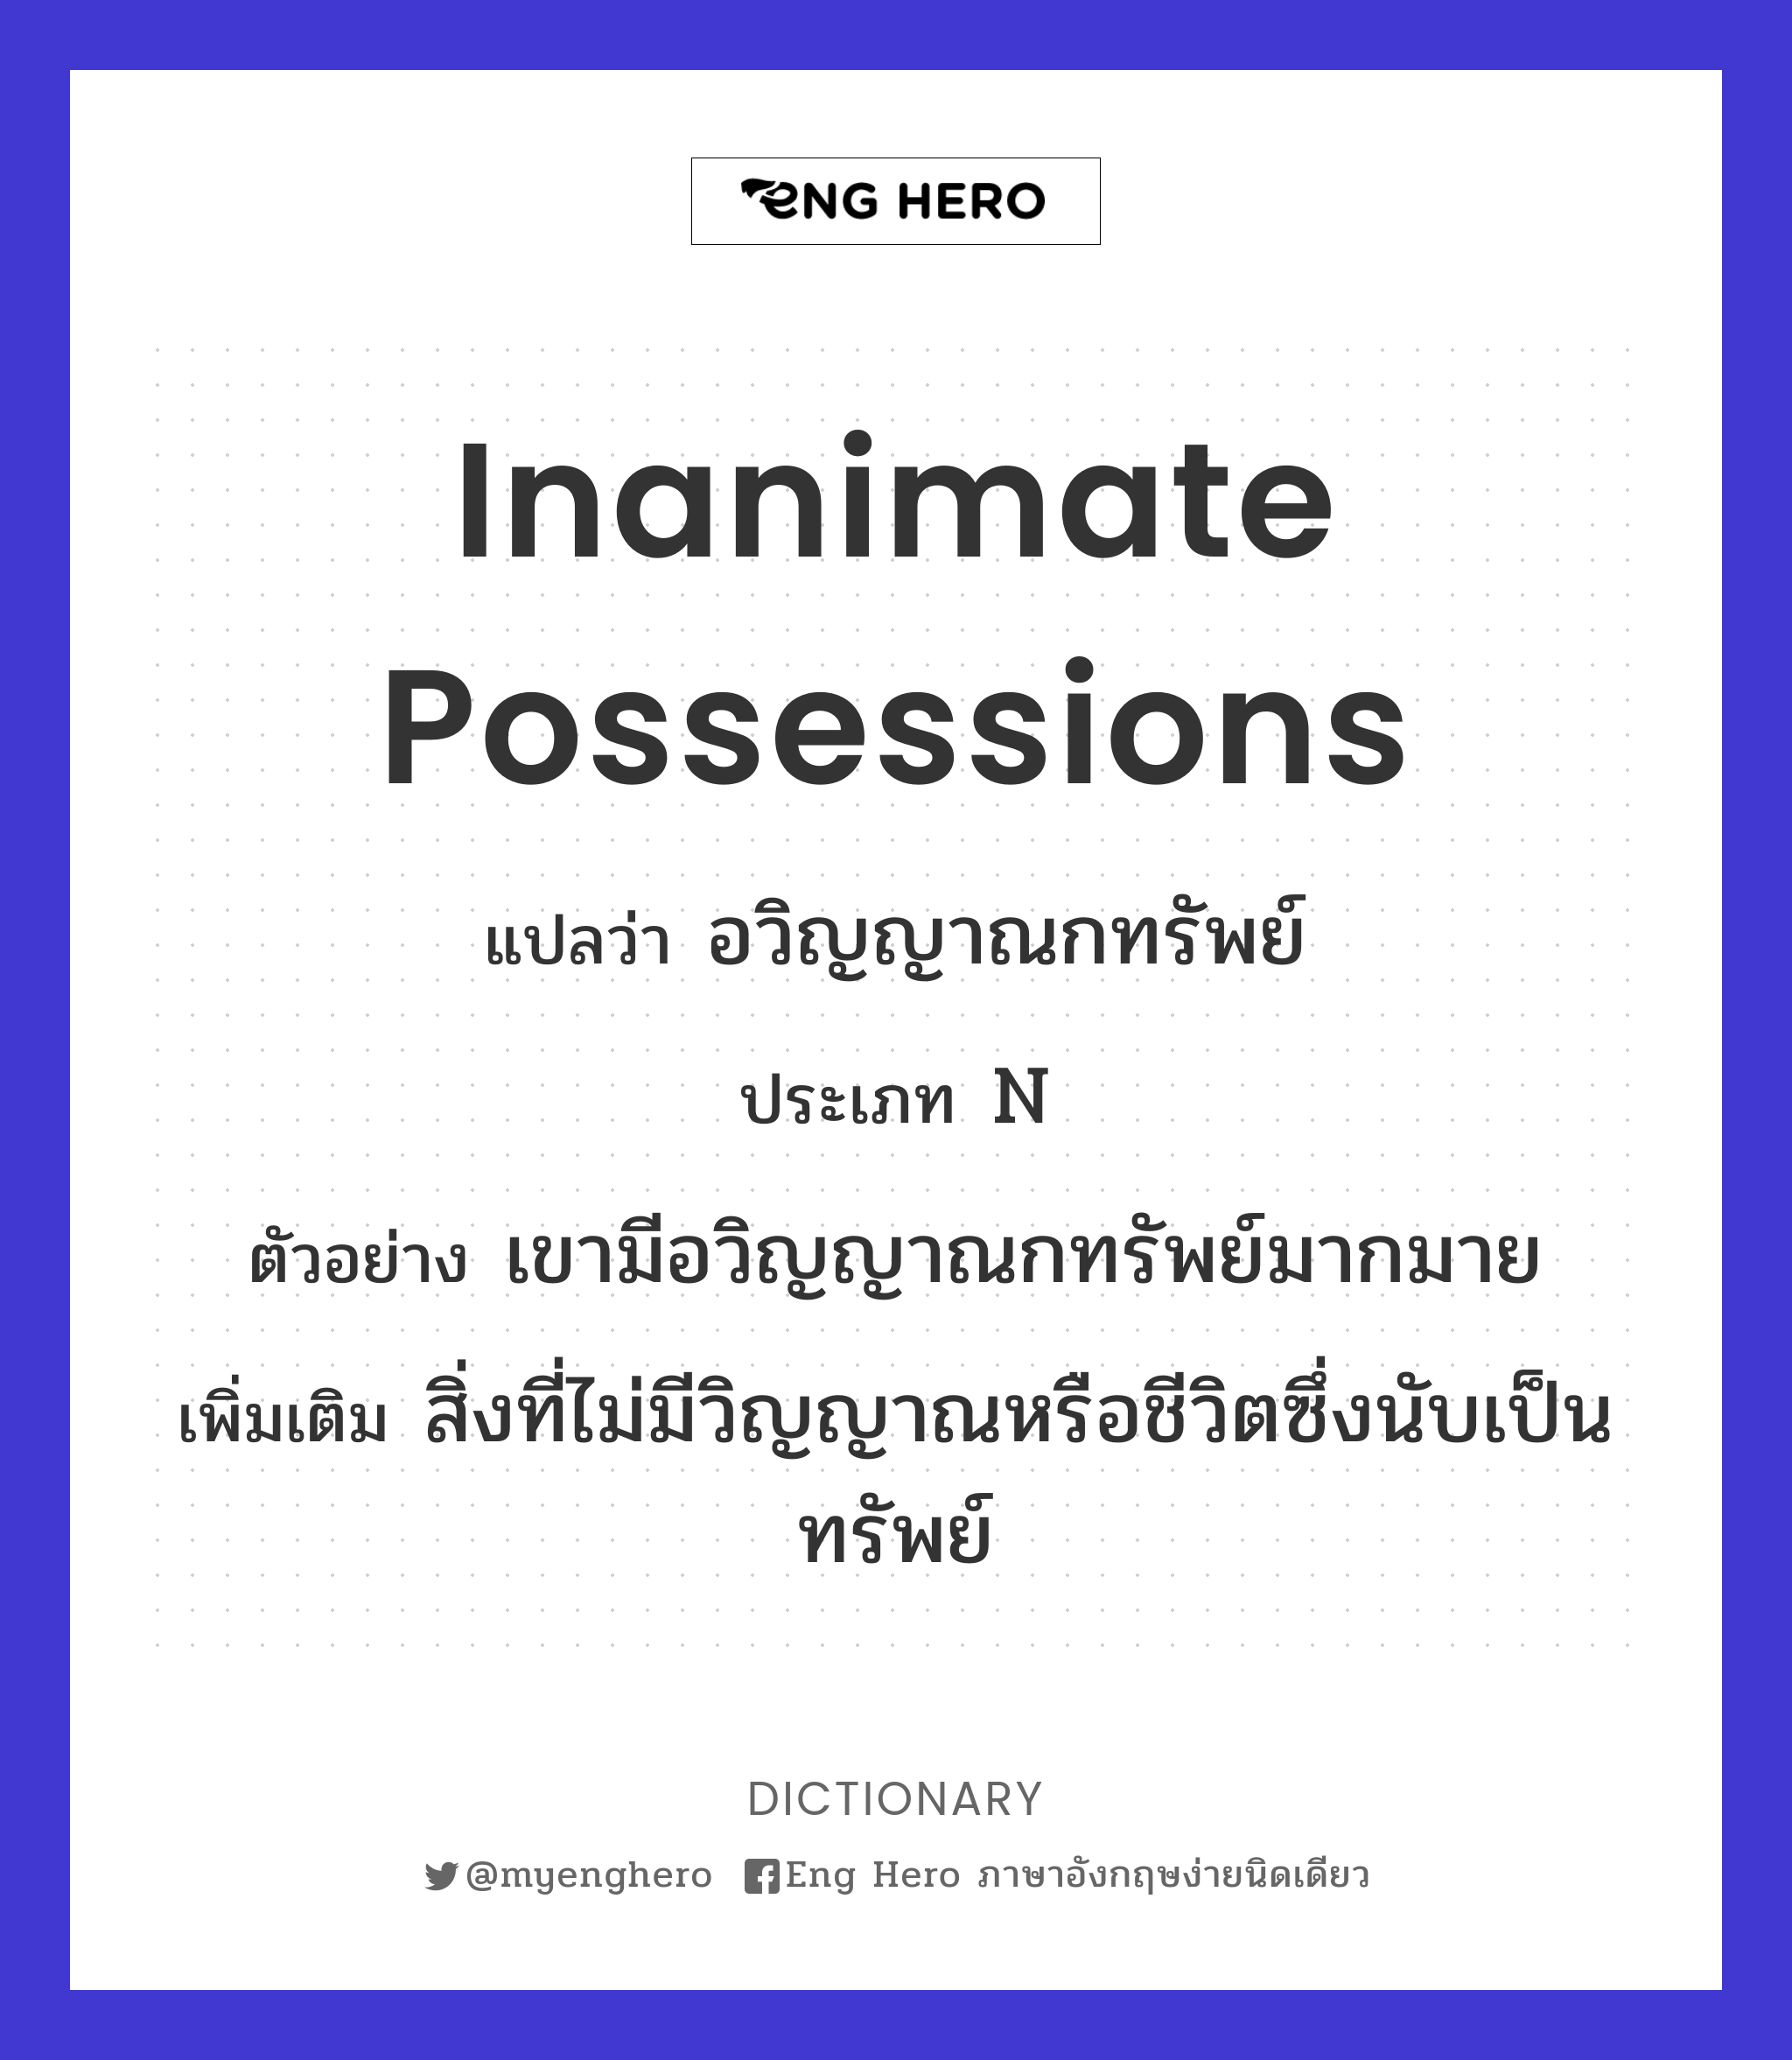 inanimate possessions